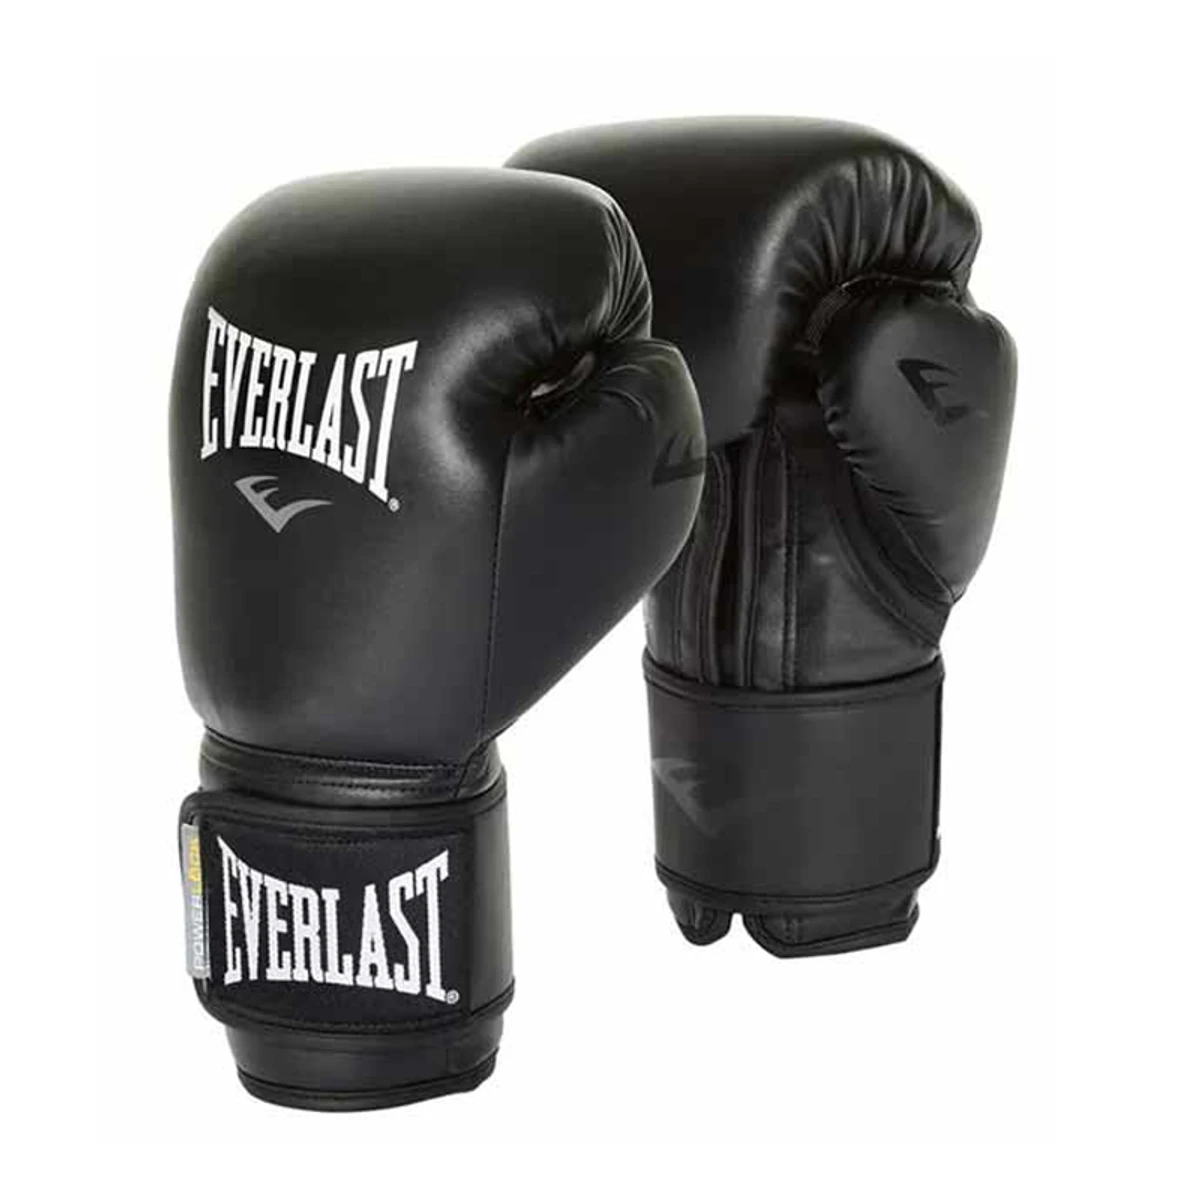 Everlast Leather Boxing Gloves - 1 Pair